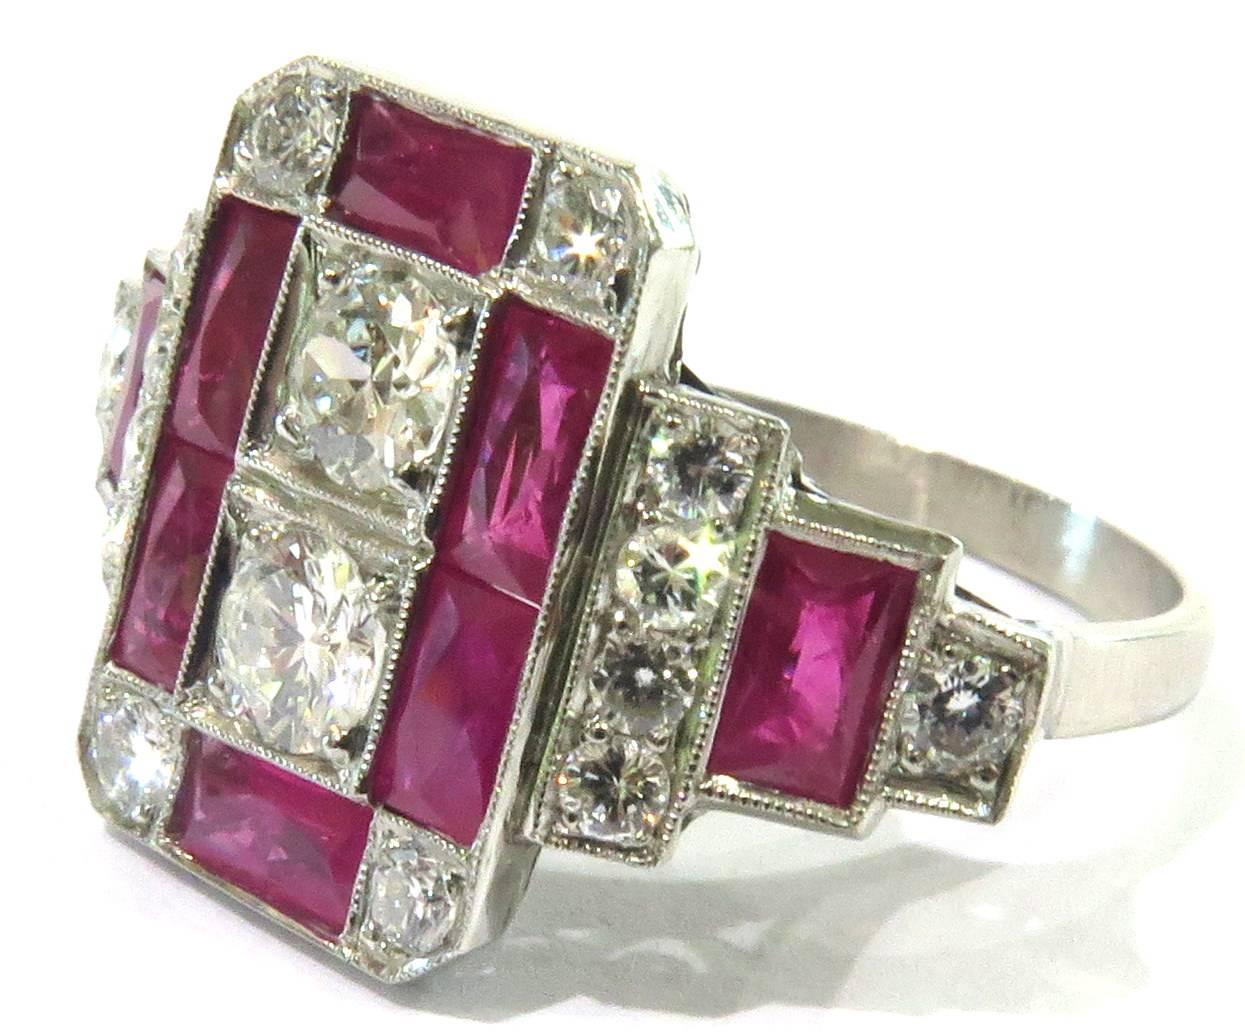 This platinum ring has such superb design. This well made ring boasts a mixture of french cut rubies plus brilliant and mine cut round diamonds all in a magnificent architectural art deco design.
This ring has approx 1.10ct diamonds and 1.50ct